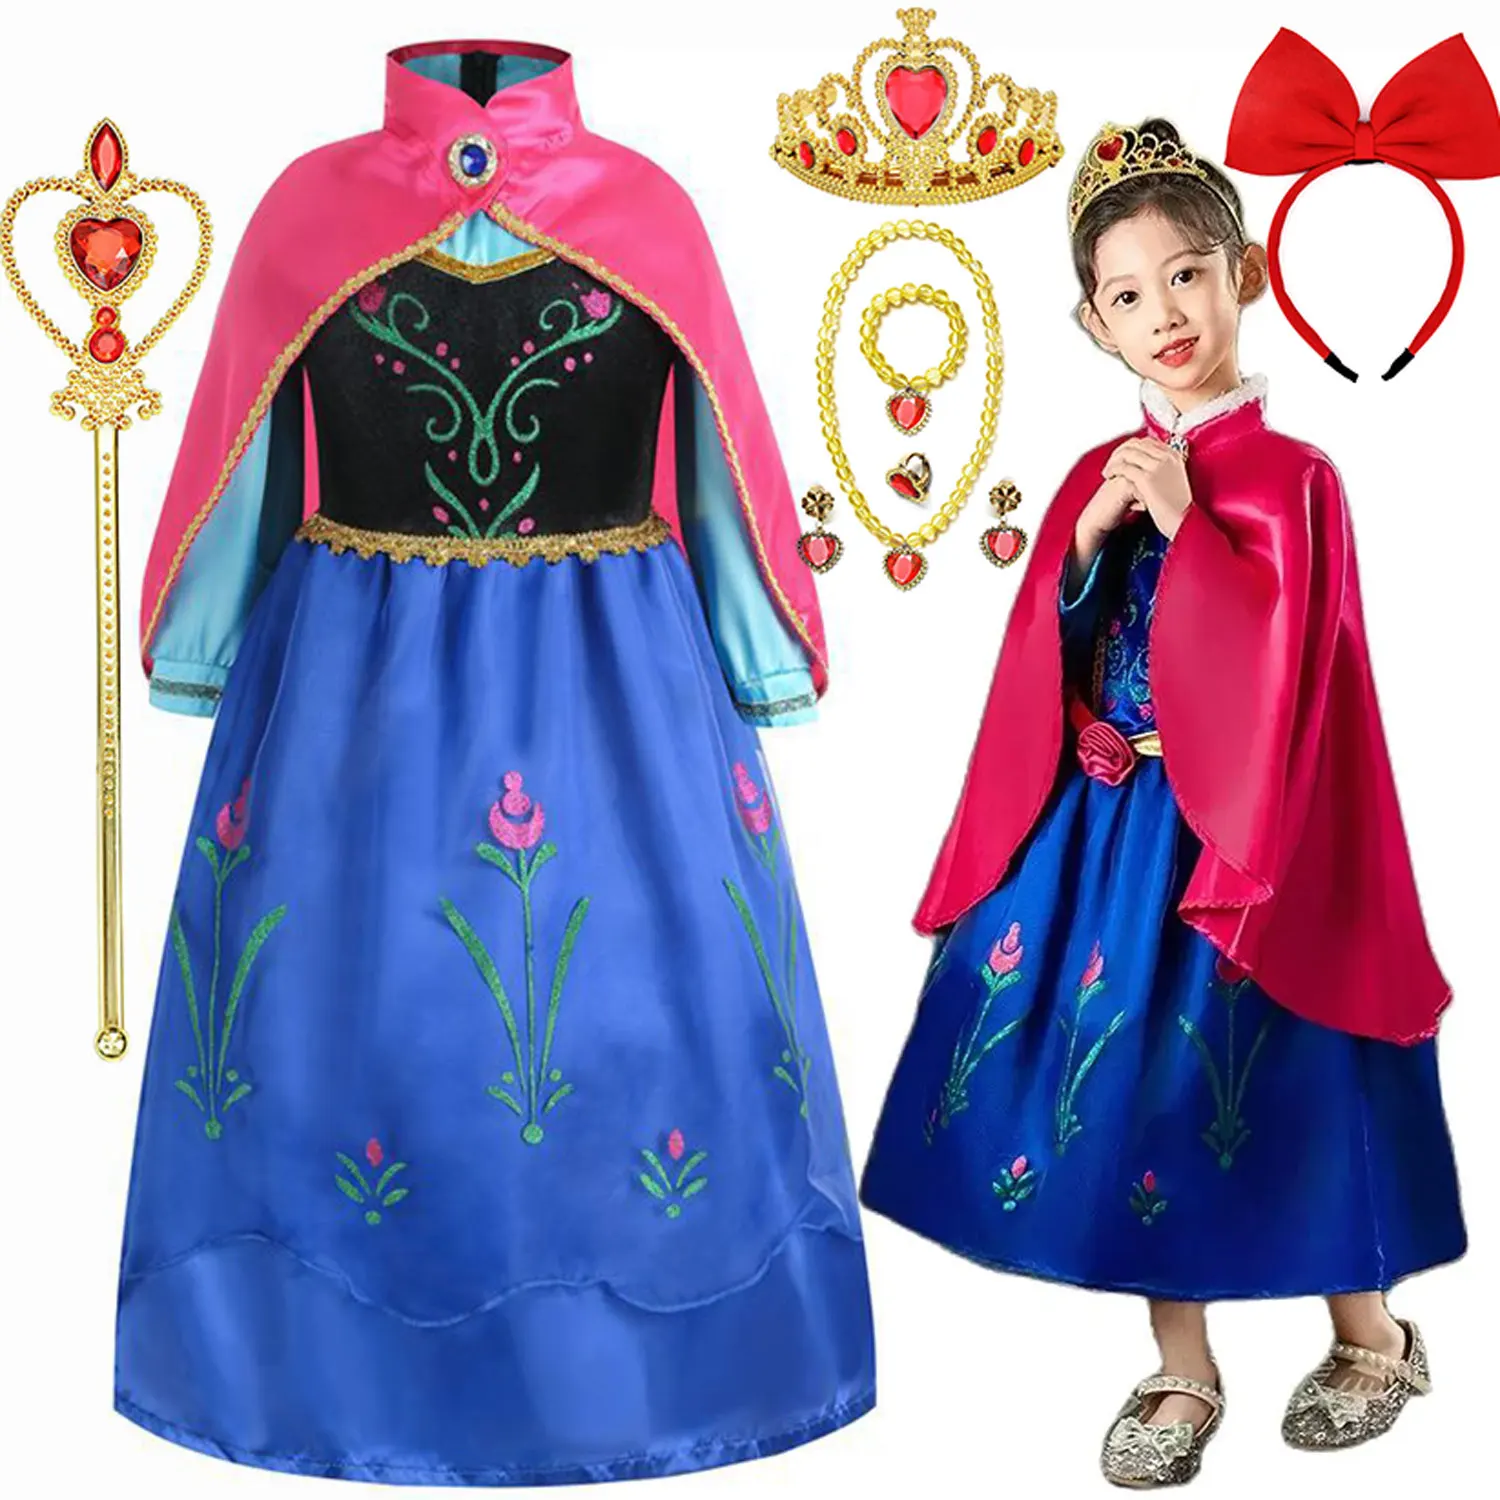 

Disney Anna Costume Princess Dress for Girs Adults Elsa Cosplay Costume Fairy Tale Party Dresses for Women Halloween Fancy Dress